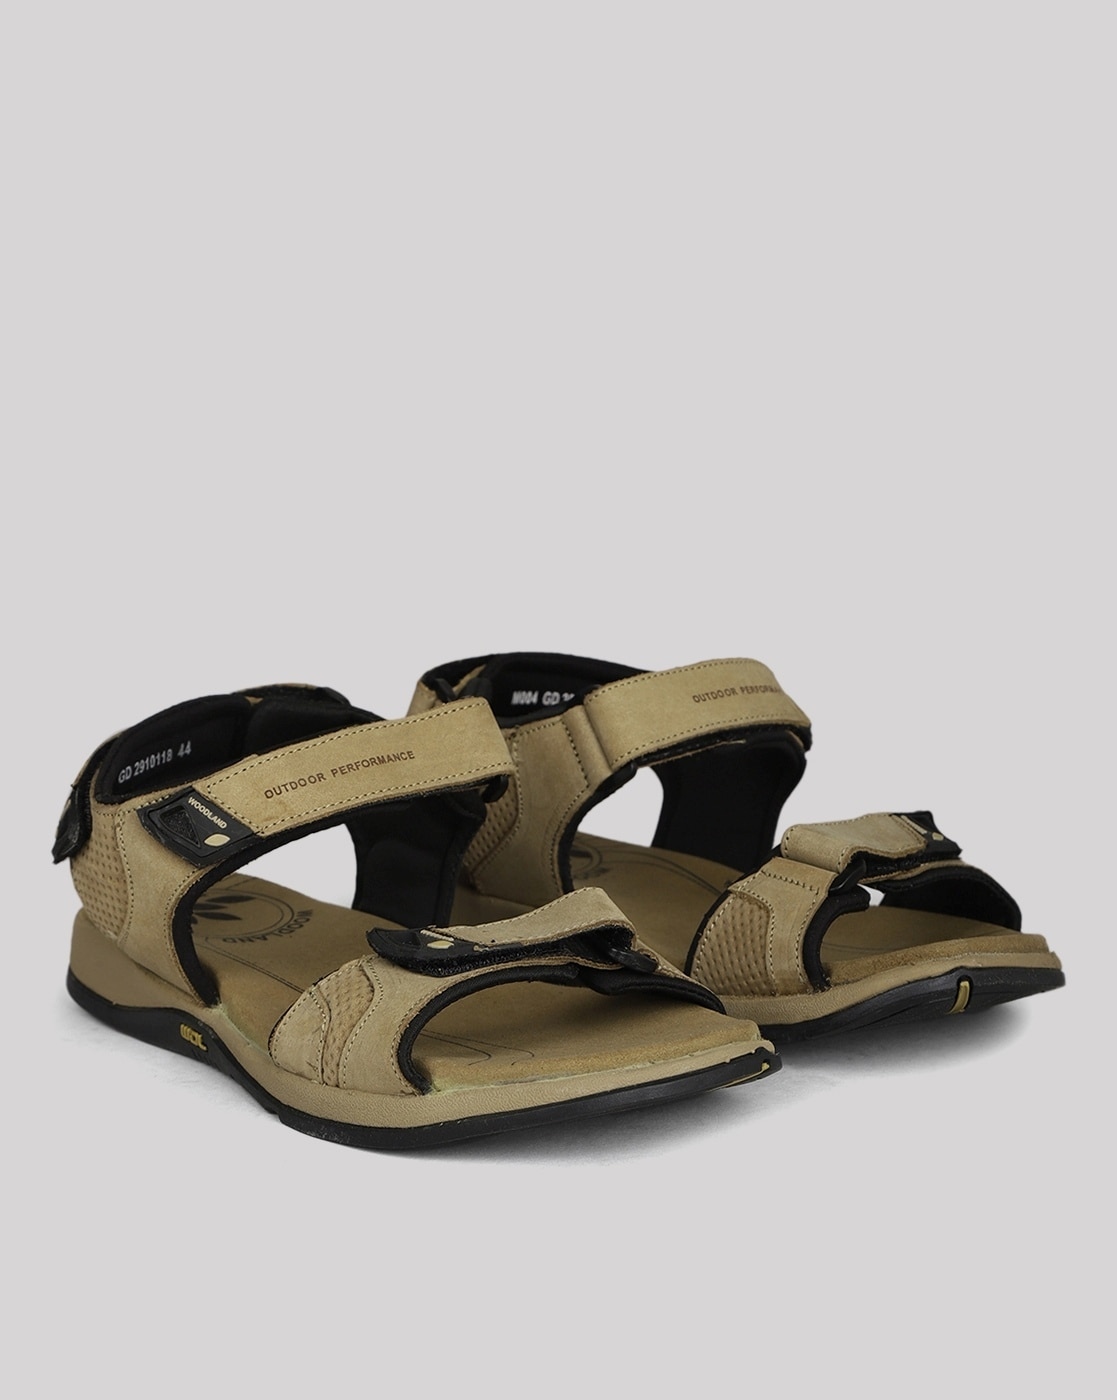 Party Wear Woodland Ladies Stylish Sandal at Rs 435/pair in Coimbatore |  ID: 15276648248